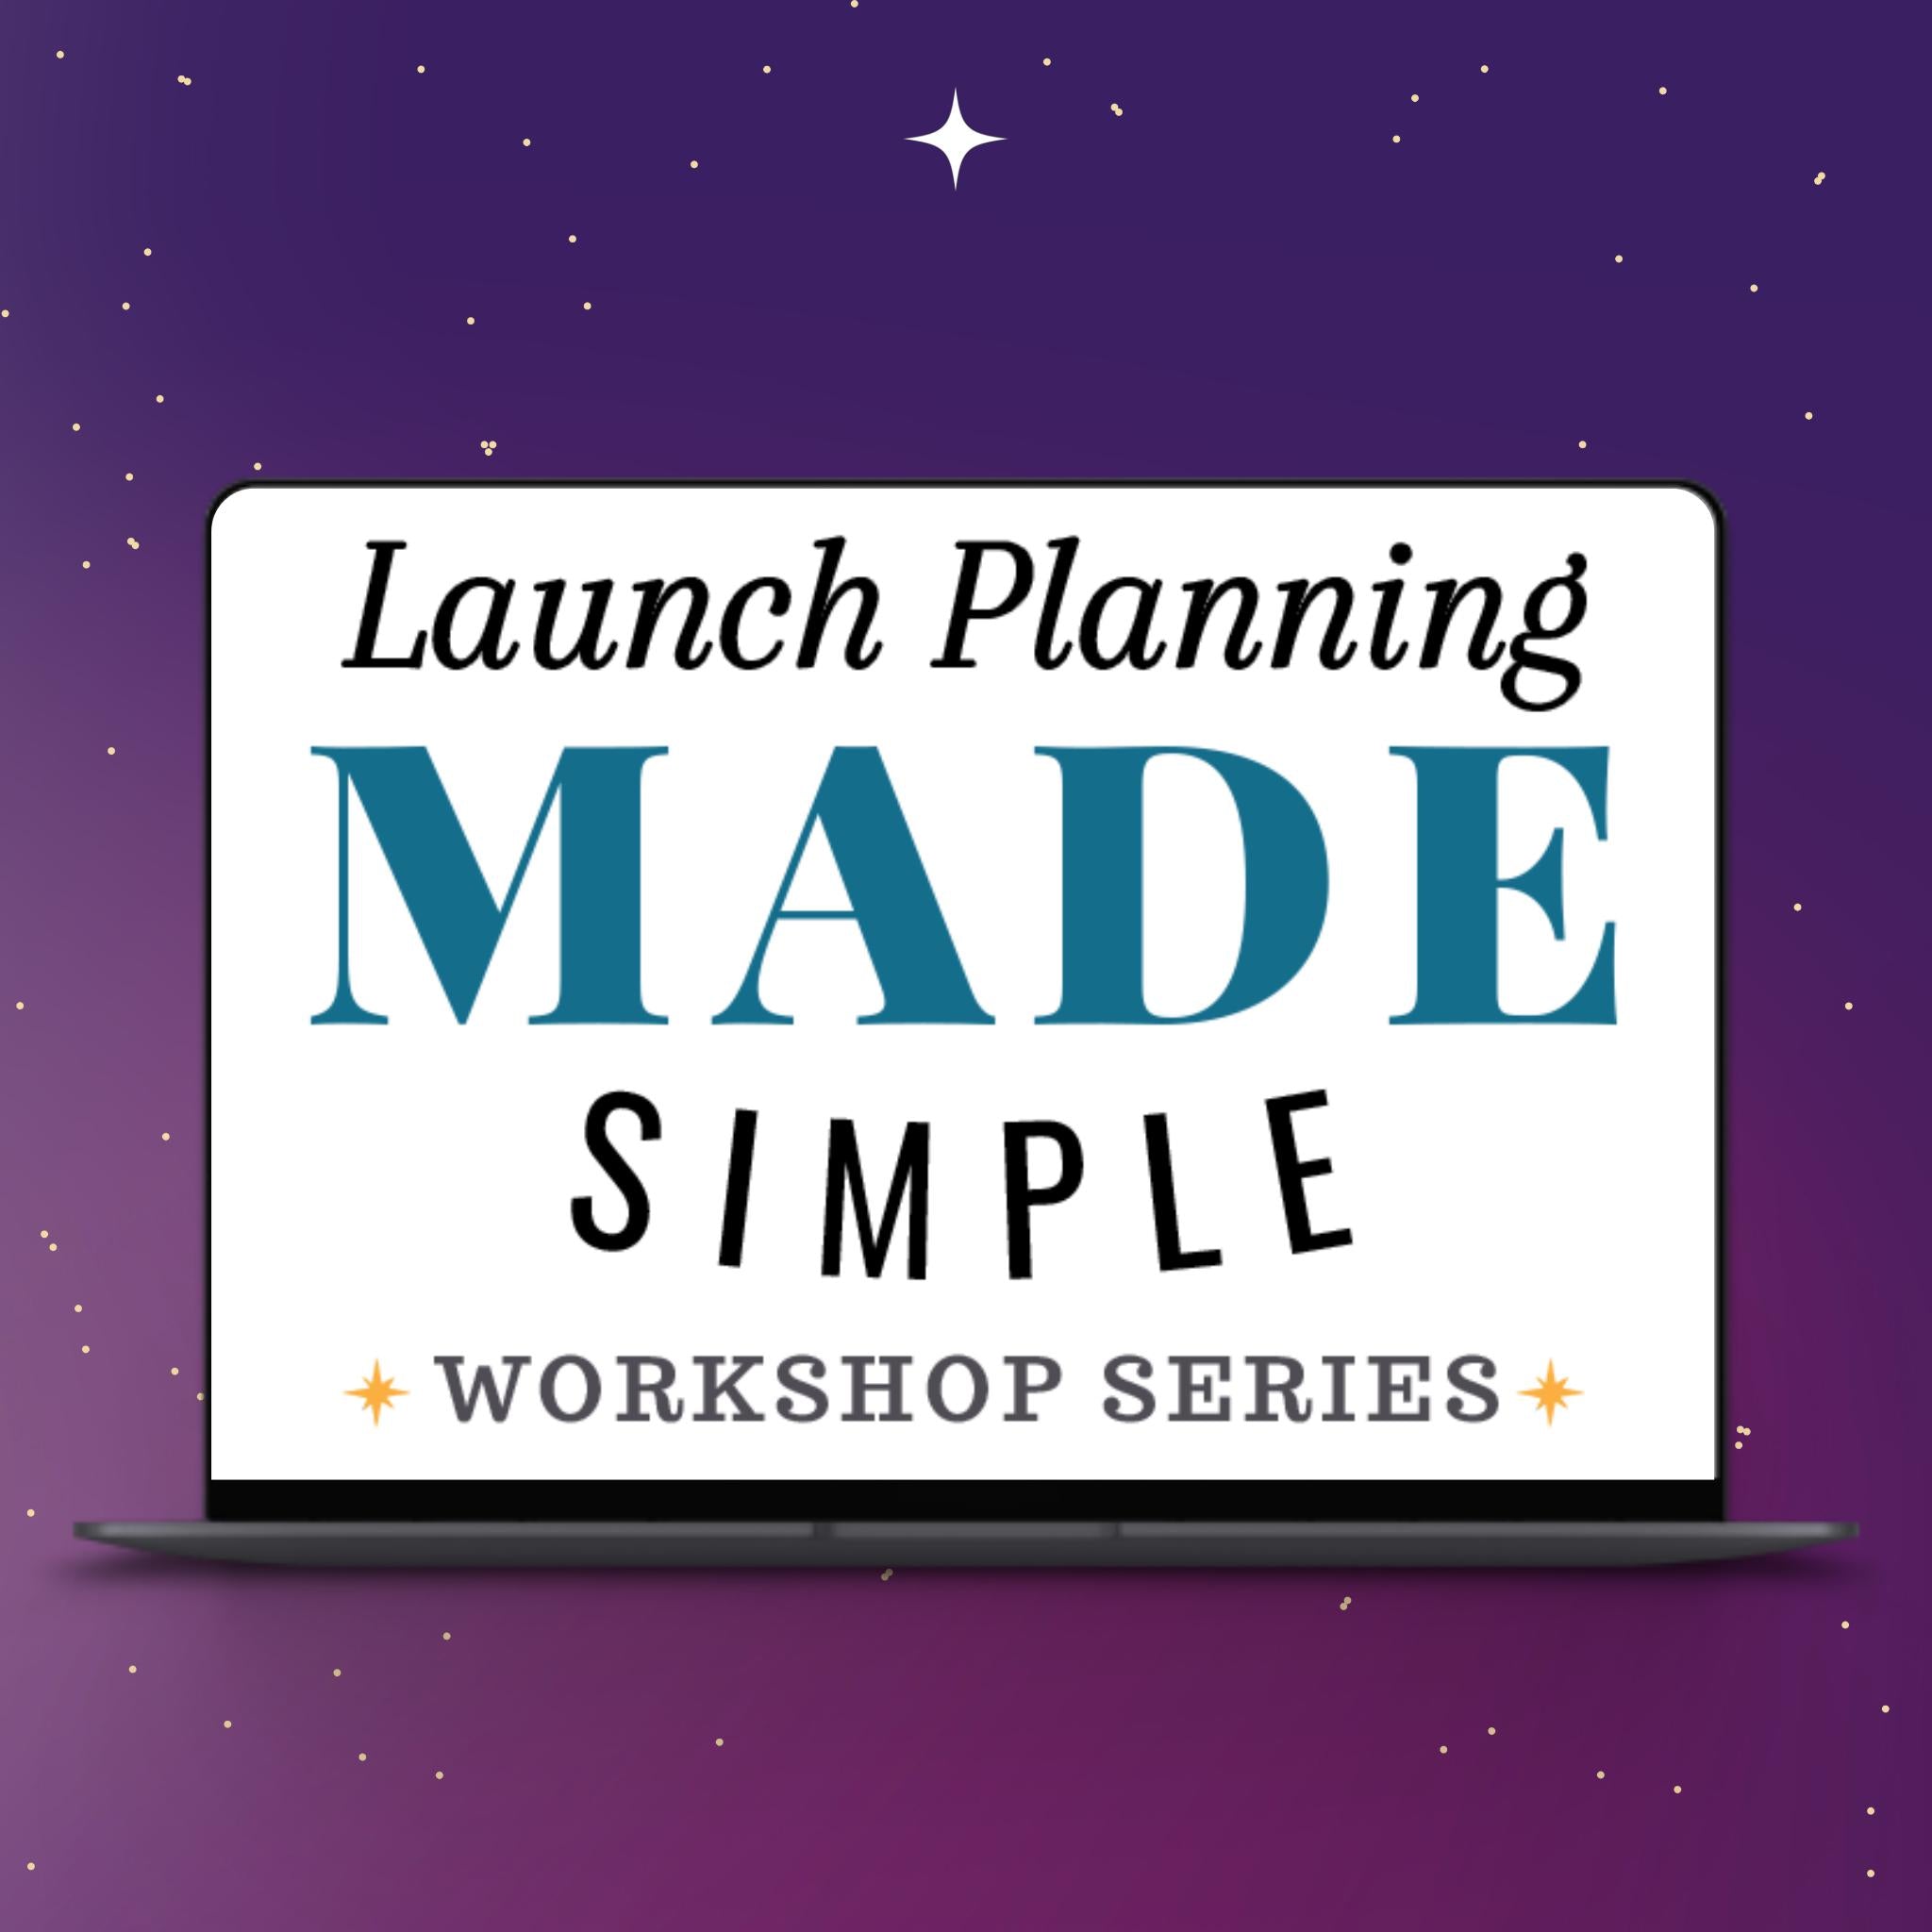 Launch Planning Made Simple